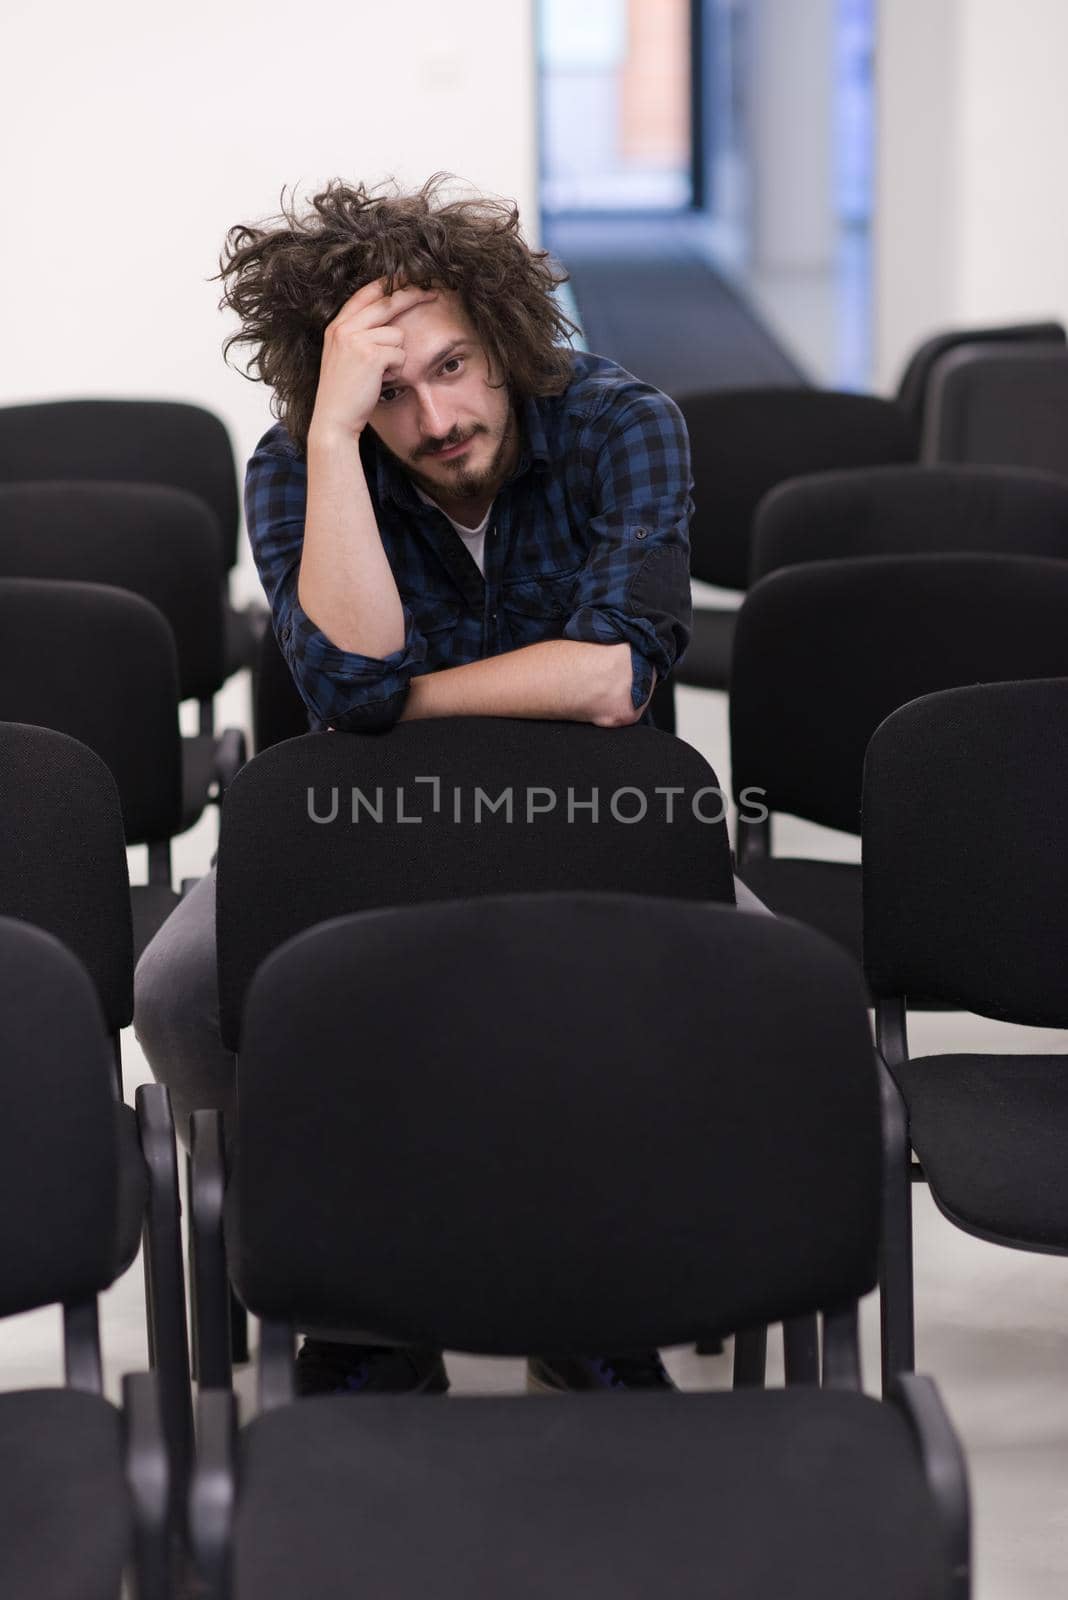 A student sits alone in a empty seats in a classroom